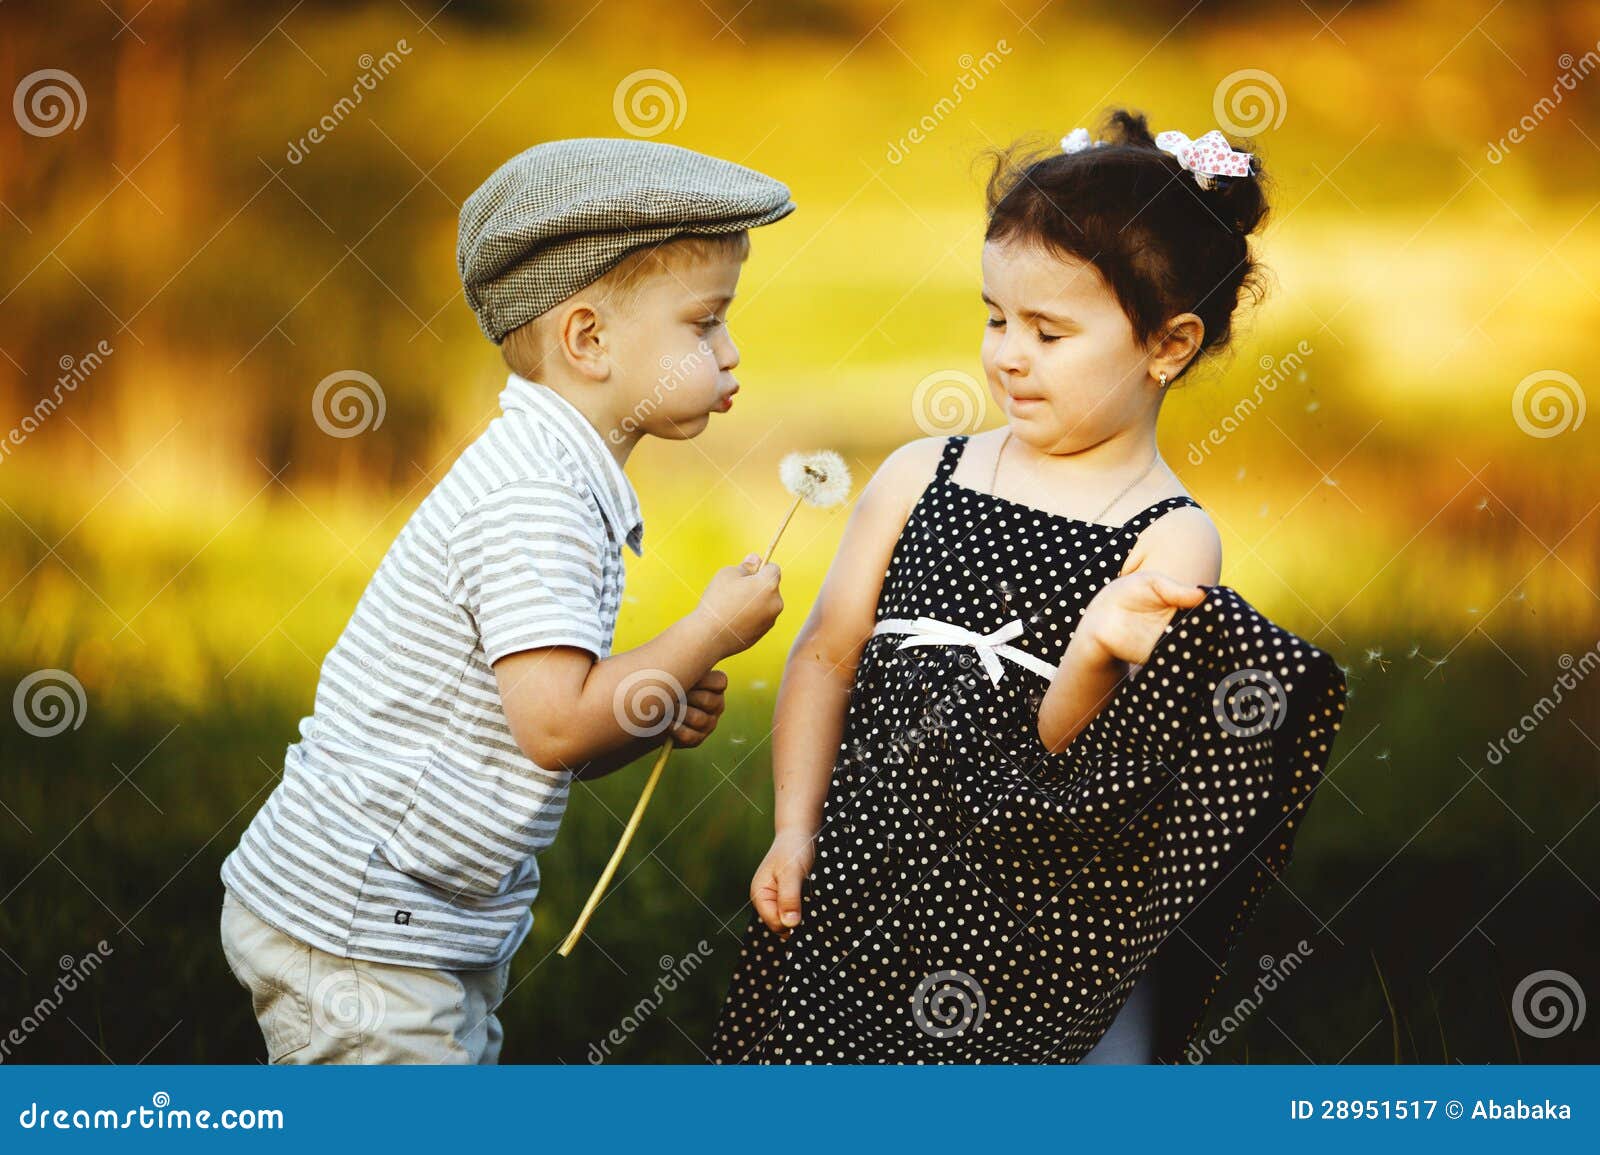 Cute boy and girl stock image. Image of couple, love - 28951517